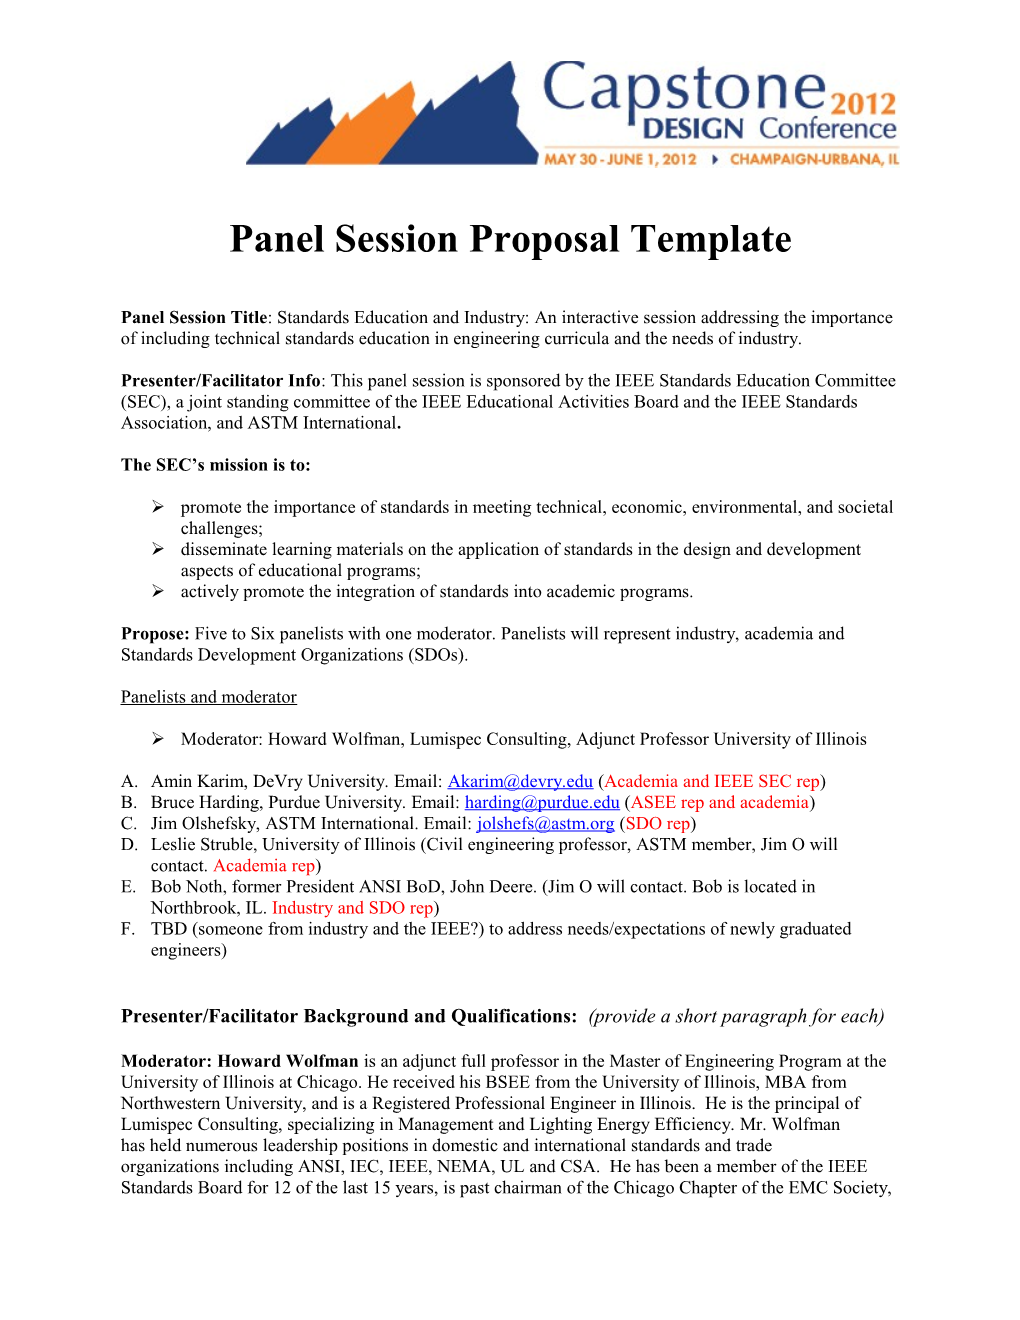 Panel Session Proposal Template